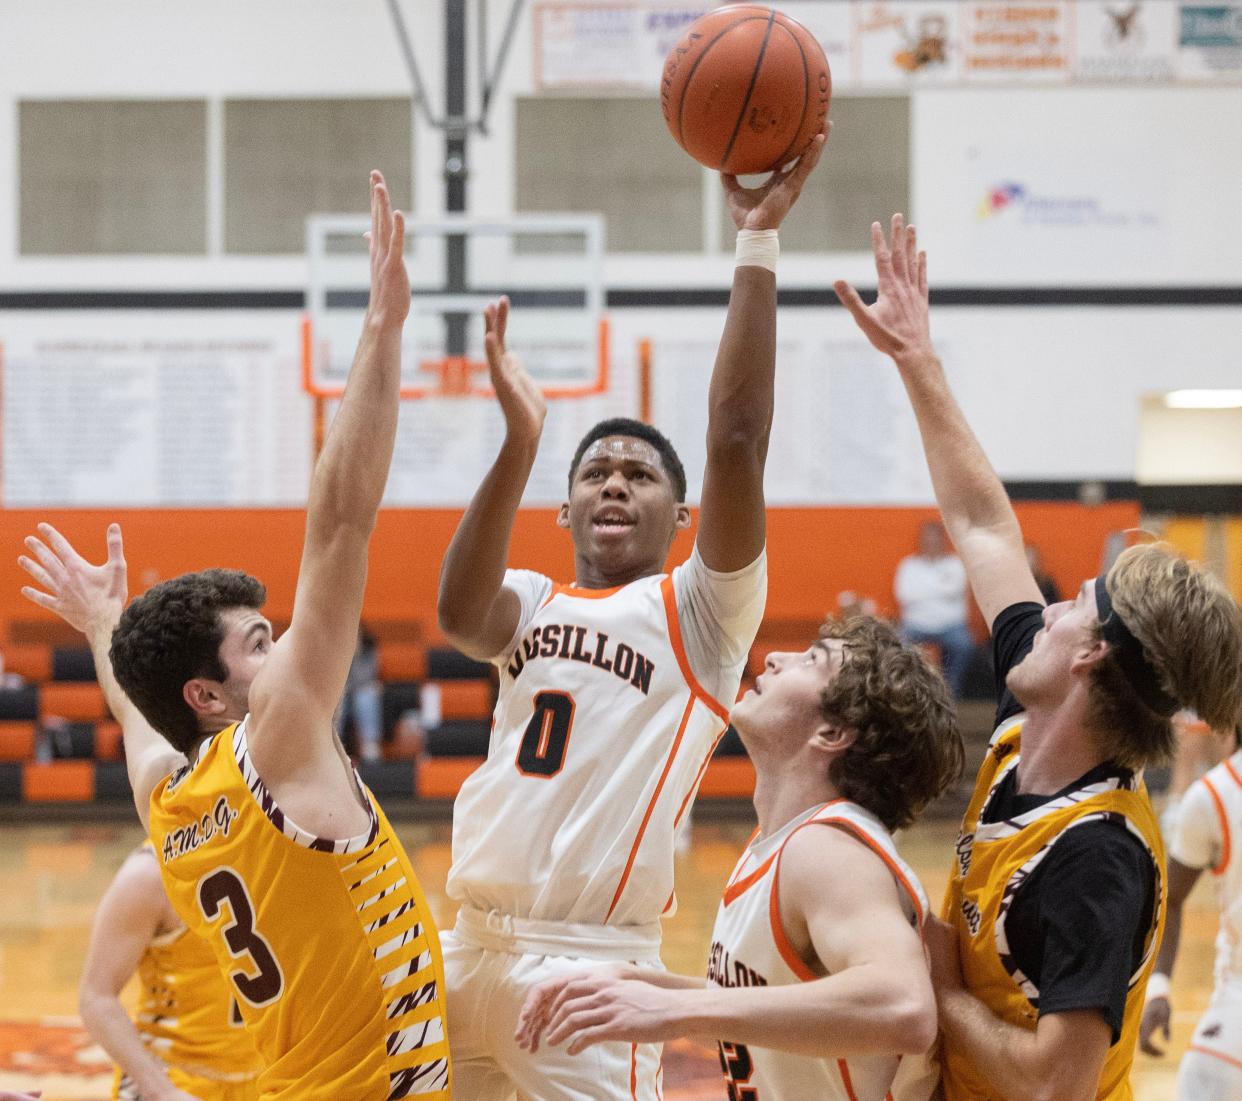 Massillon's Jalen Slaughter shoots in the first half vs. Walsh Jesuit.